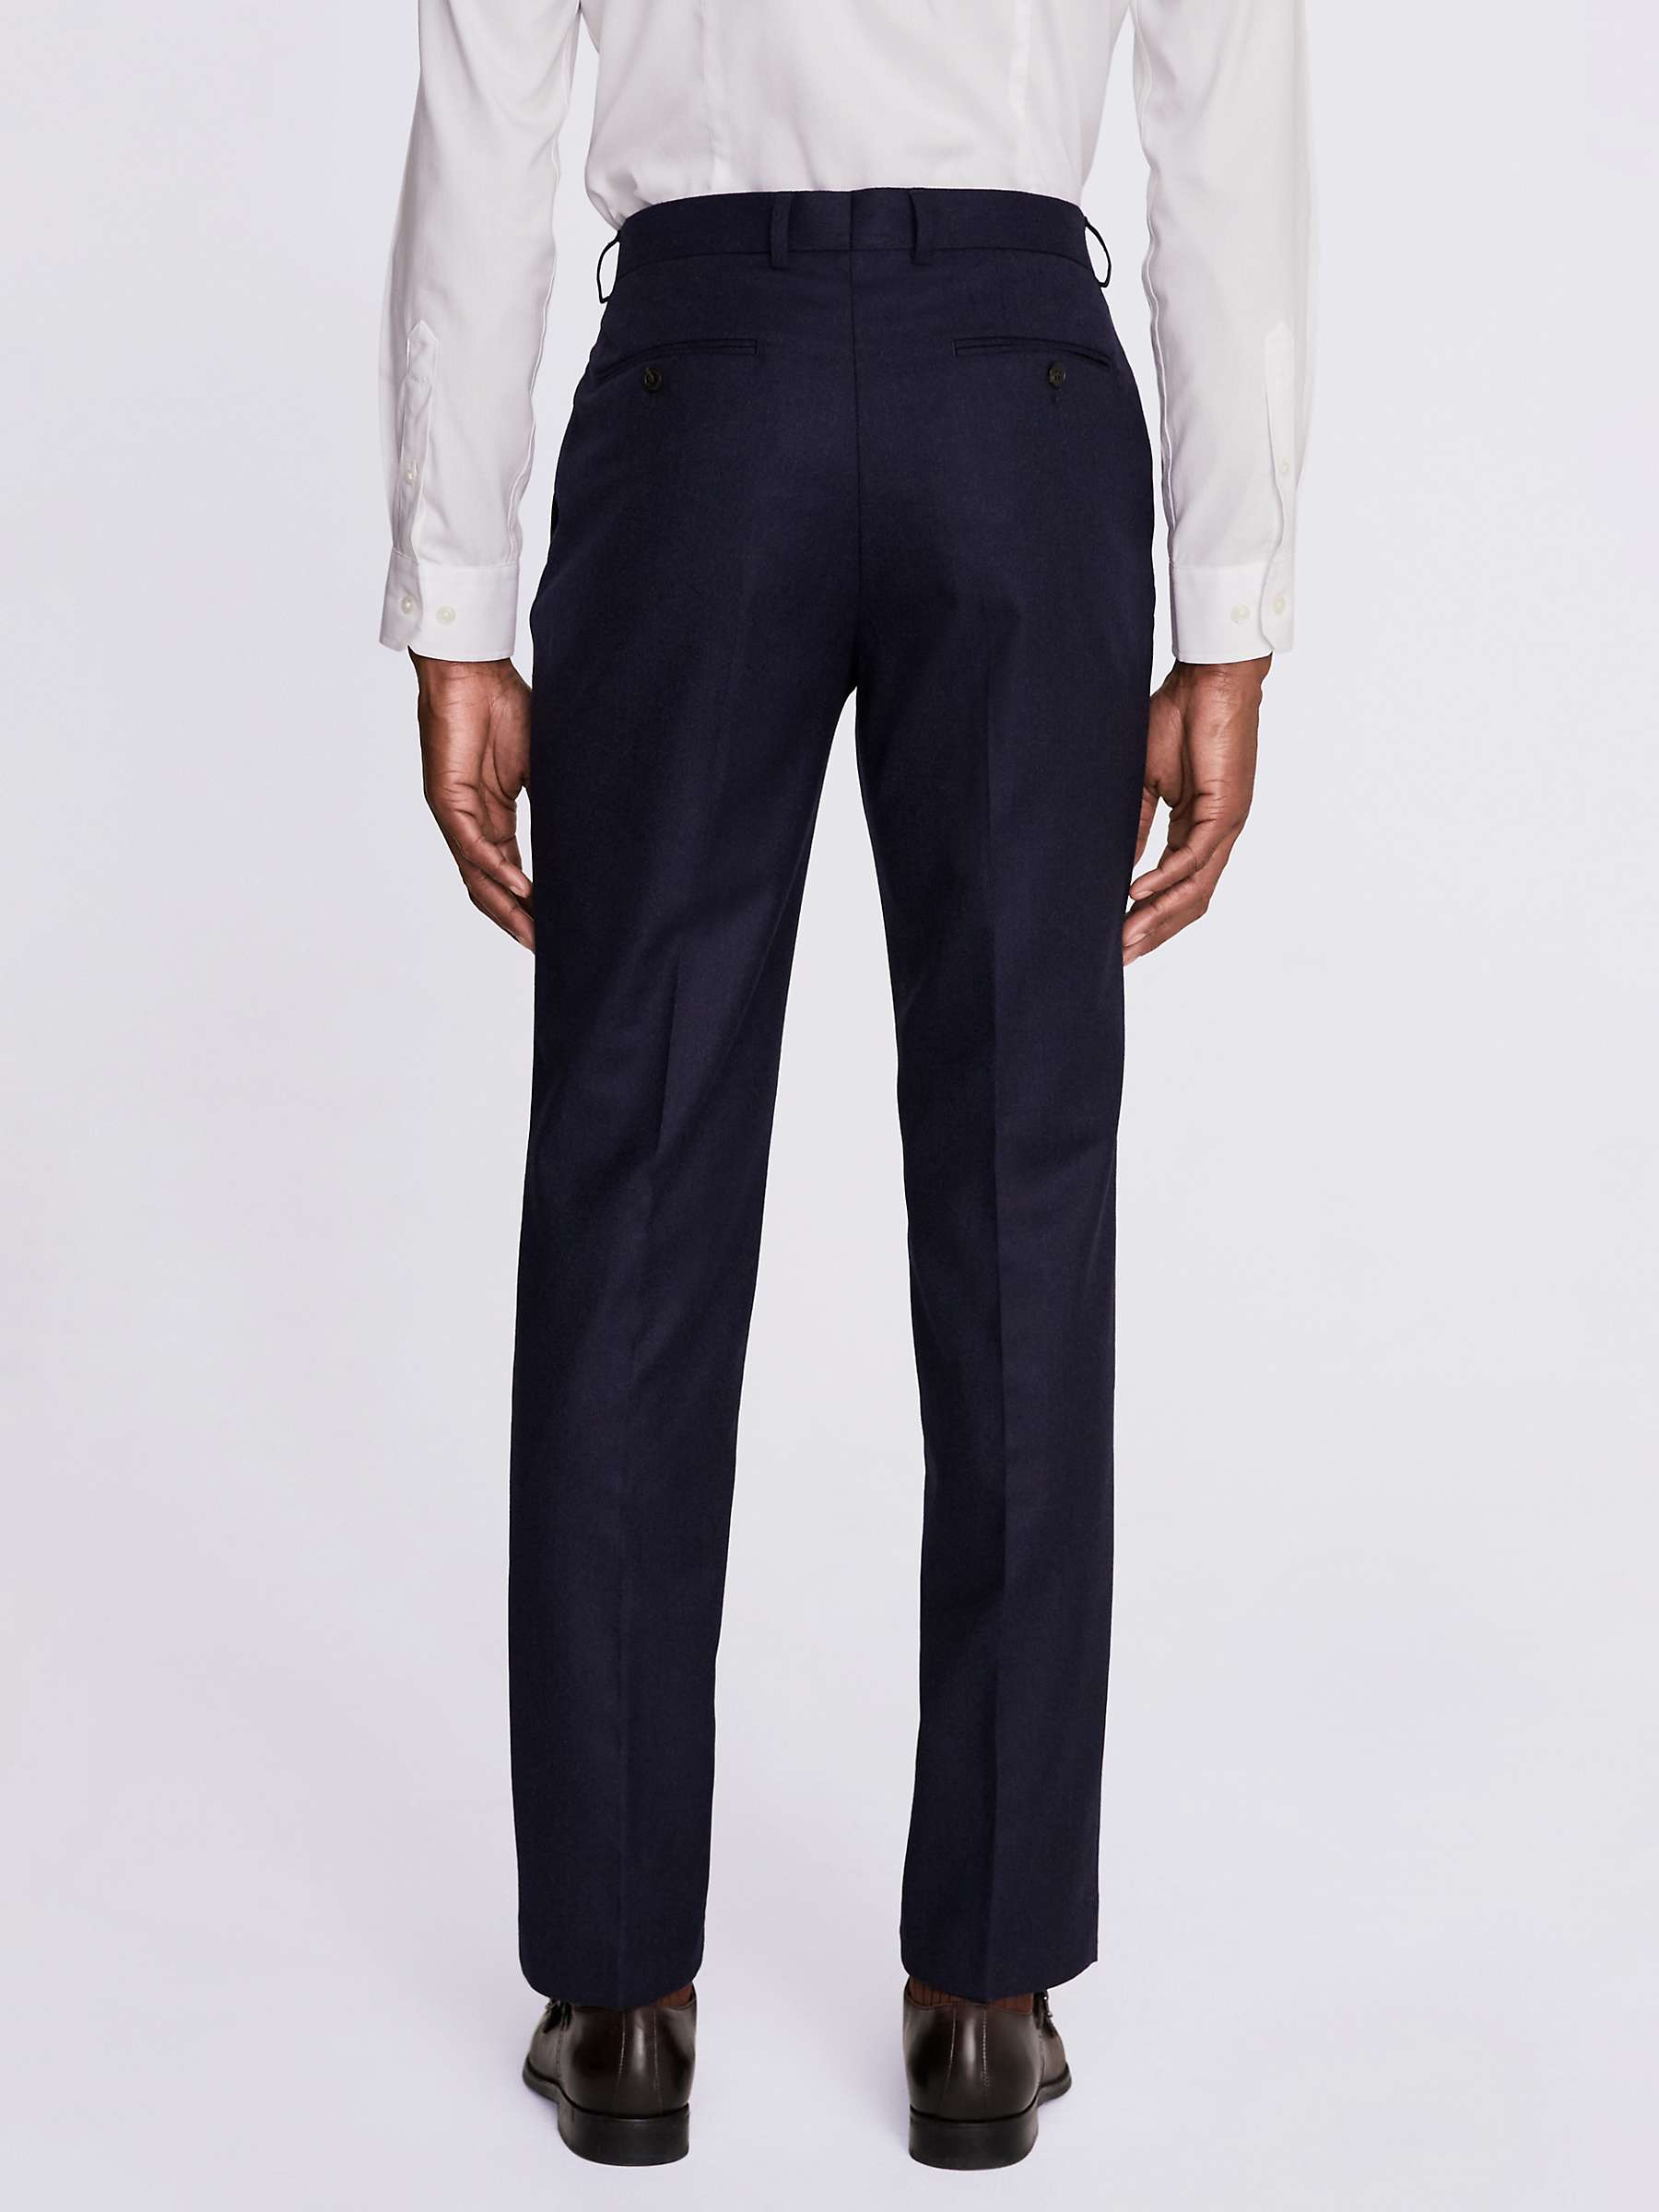 Buy Moss Italian Tailored Fit Trousers, Blue Online at johnlewis.com